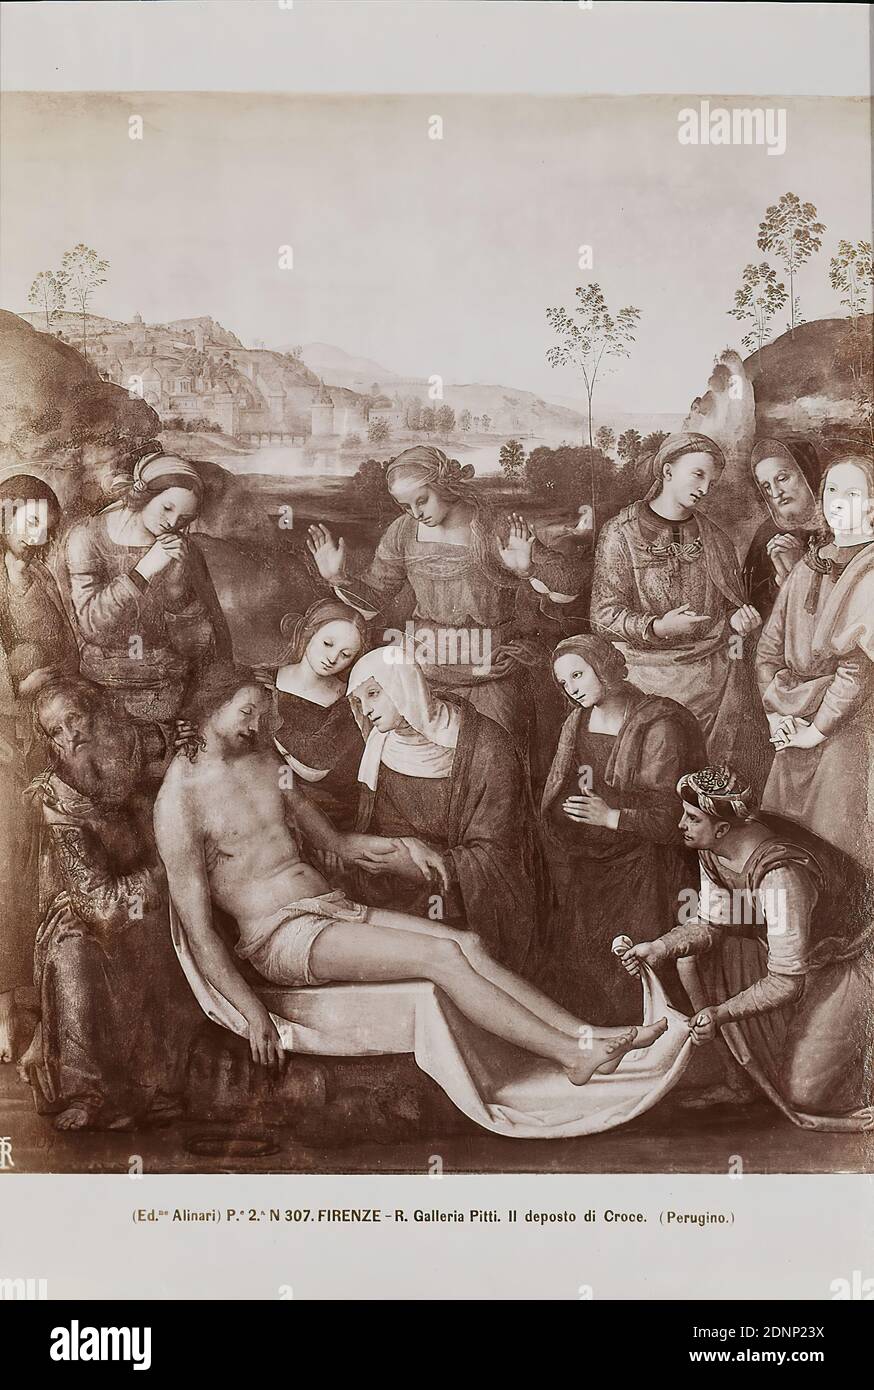 Pietro Perugino: Deposition from the cross. Galleria Palatina, Palazzo Pitti, Florence, albumin paper, black and white positive process, image size: height: 24.80 cm; width: 17.60 cm, FIRENZE. R. Galleria Pitti. Il deposto di Croce. (Perugino.), painting, deposition from the cross Stock Photo